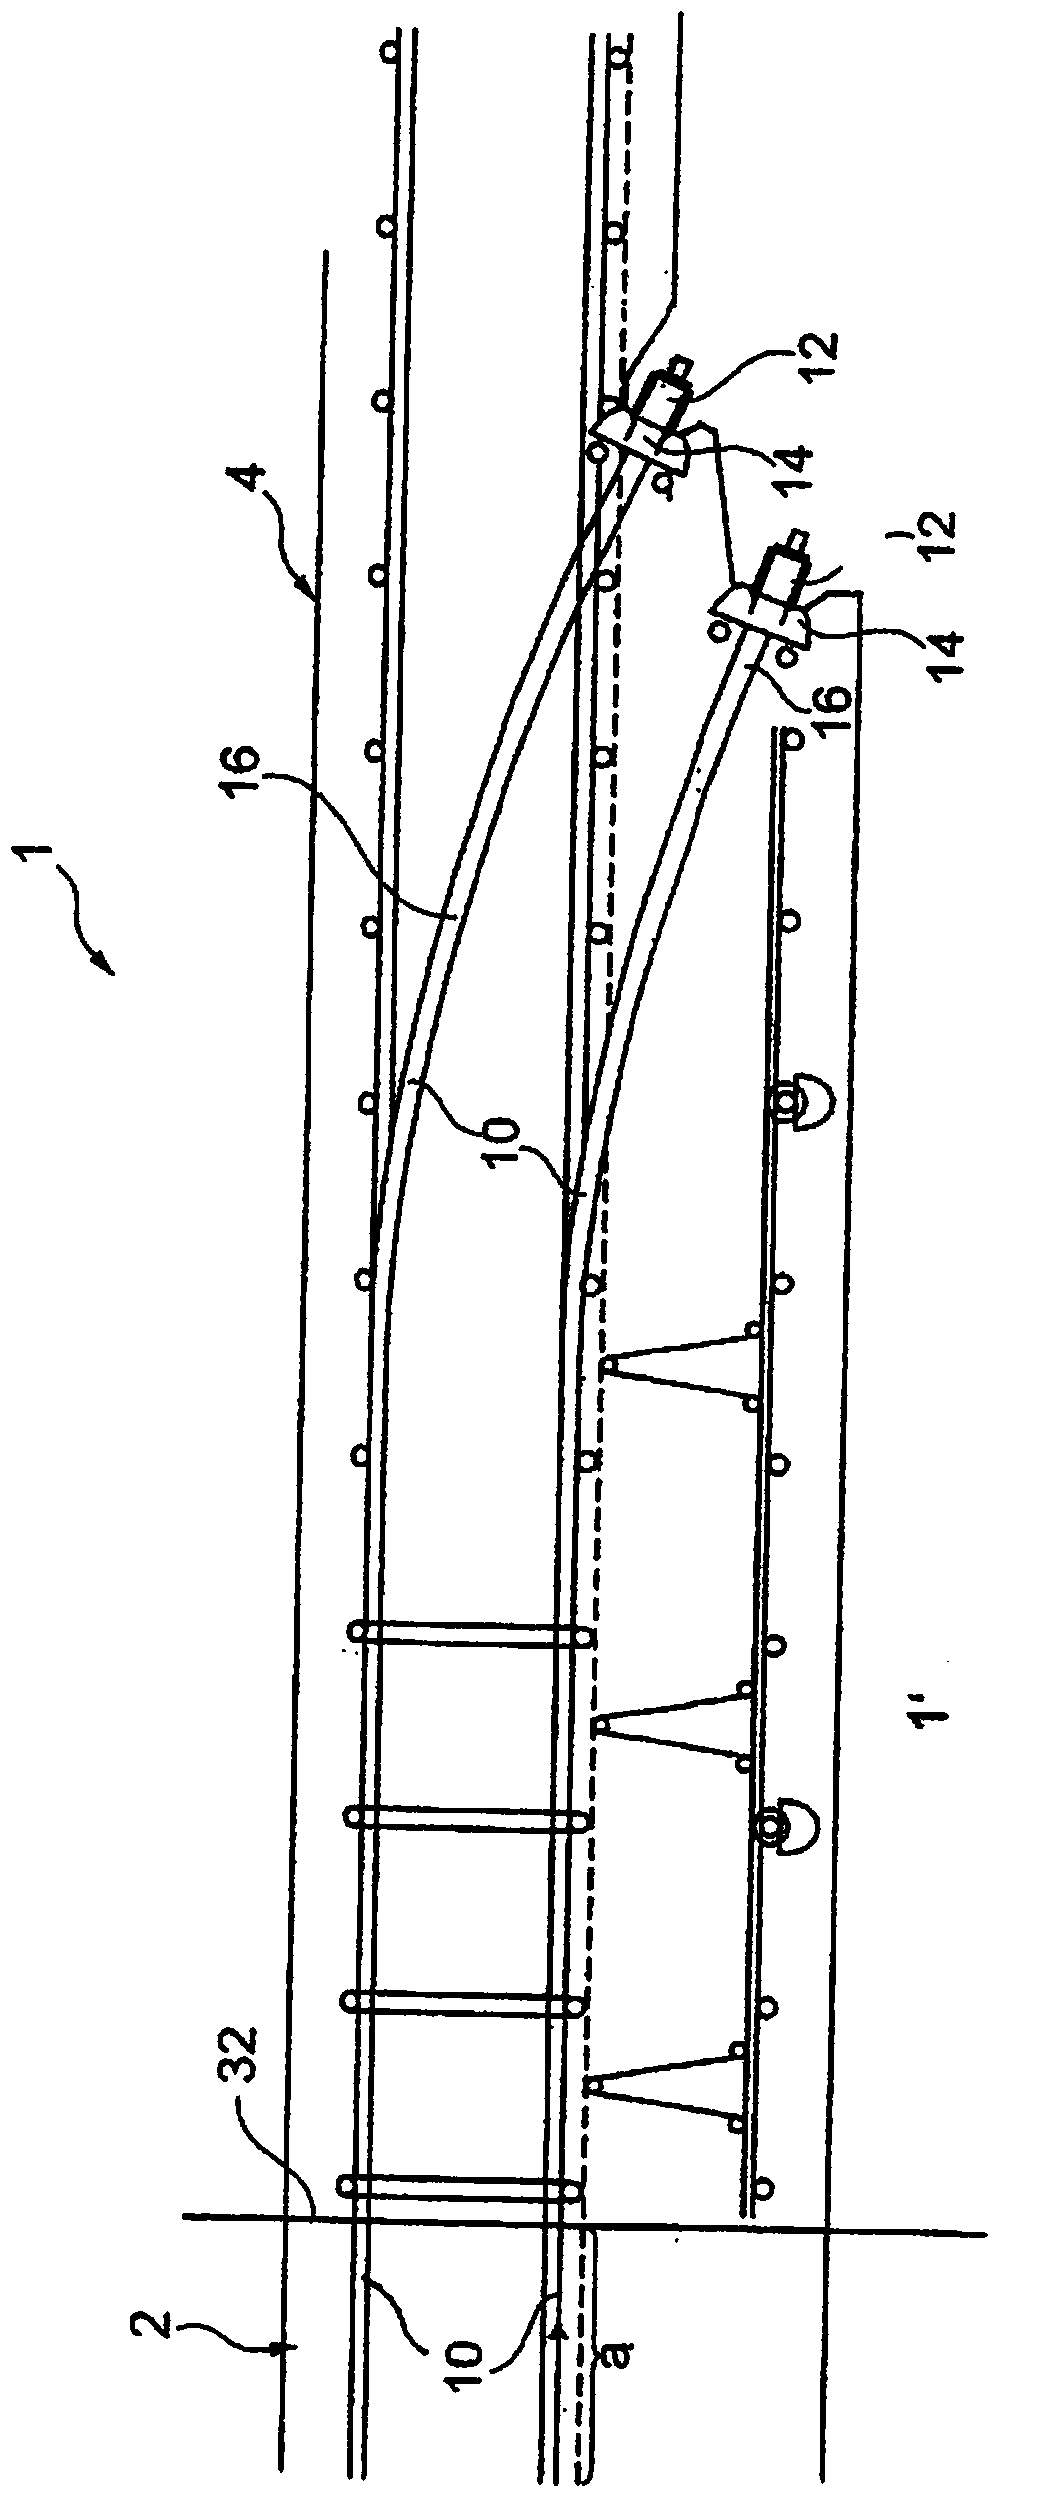 Tower-shaped supporting structure